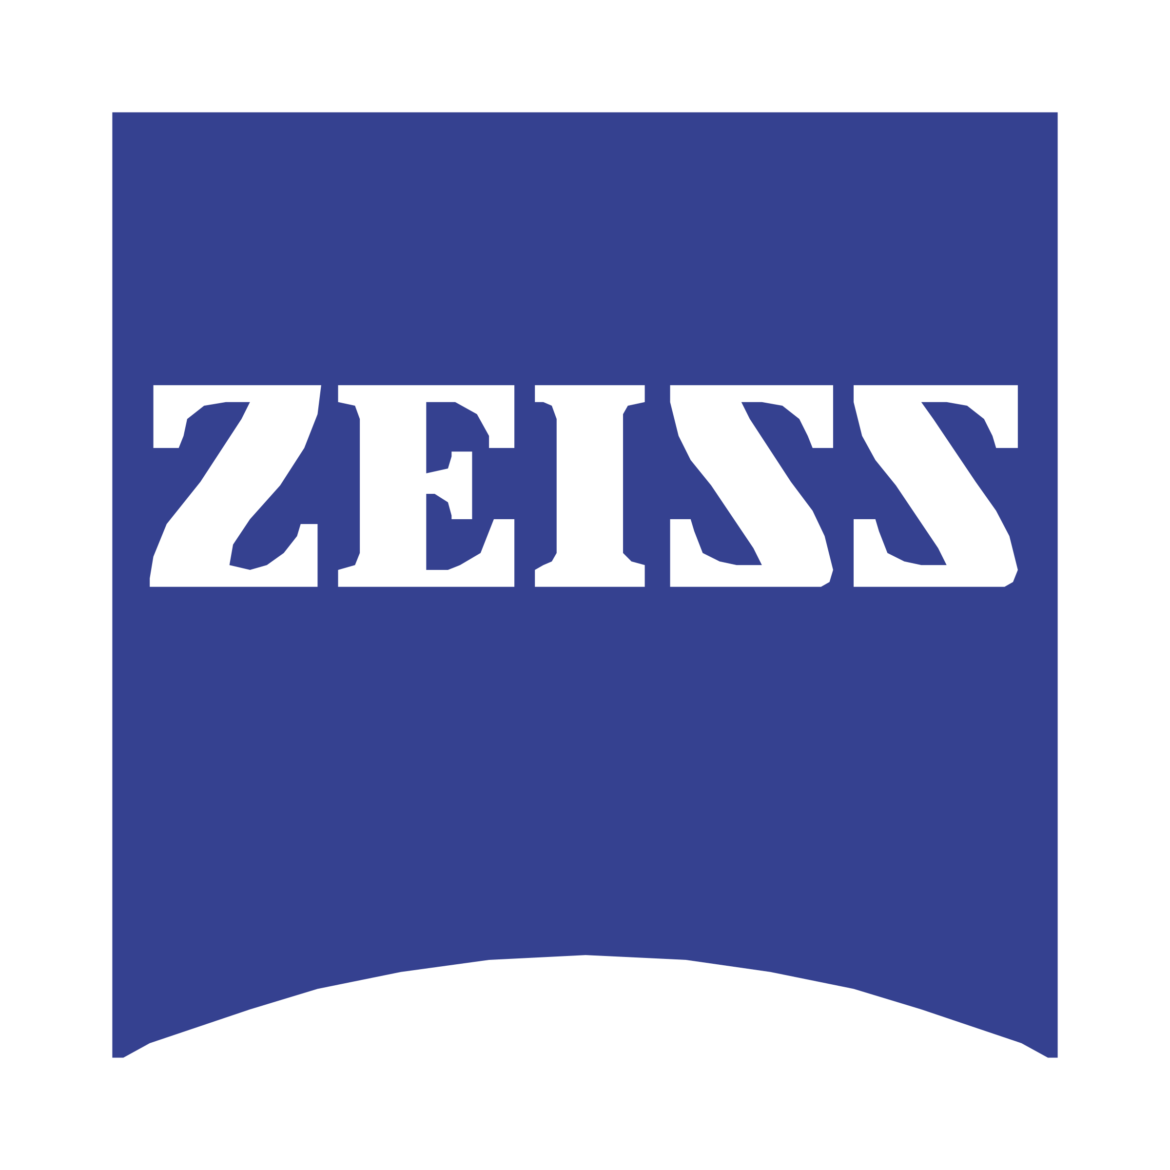 Changes to the Executive Board of Carl Zeiss AG